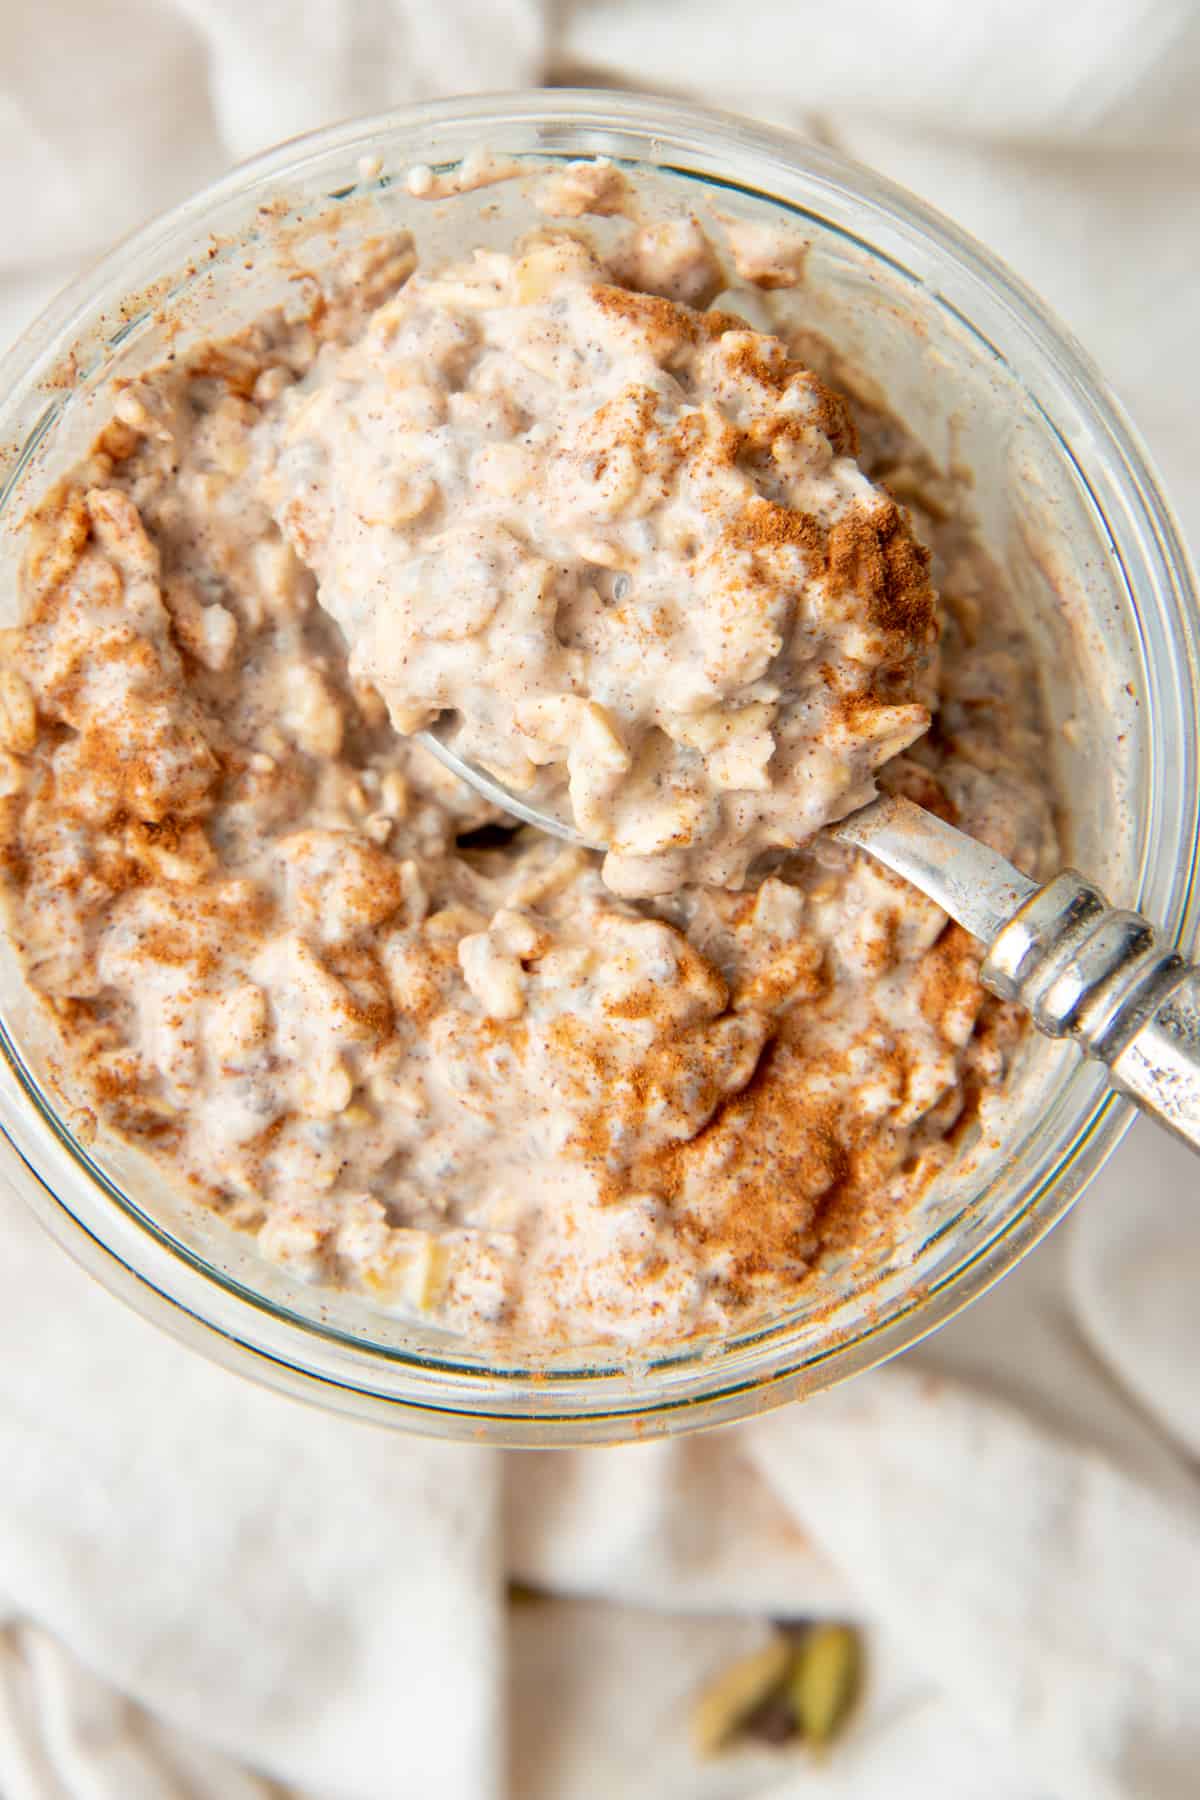 A spoon scoops out a bite of chai overnight oats.